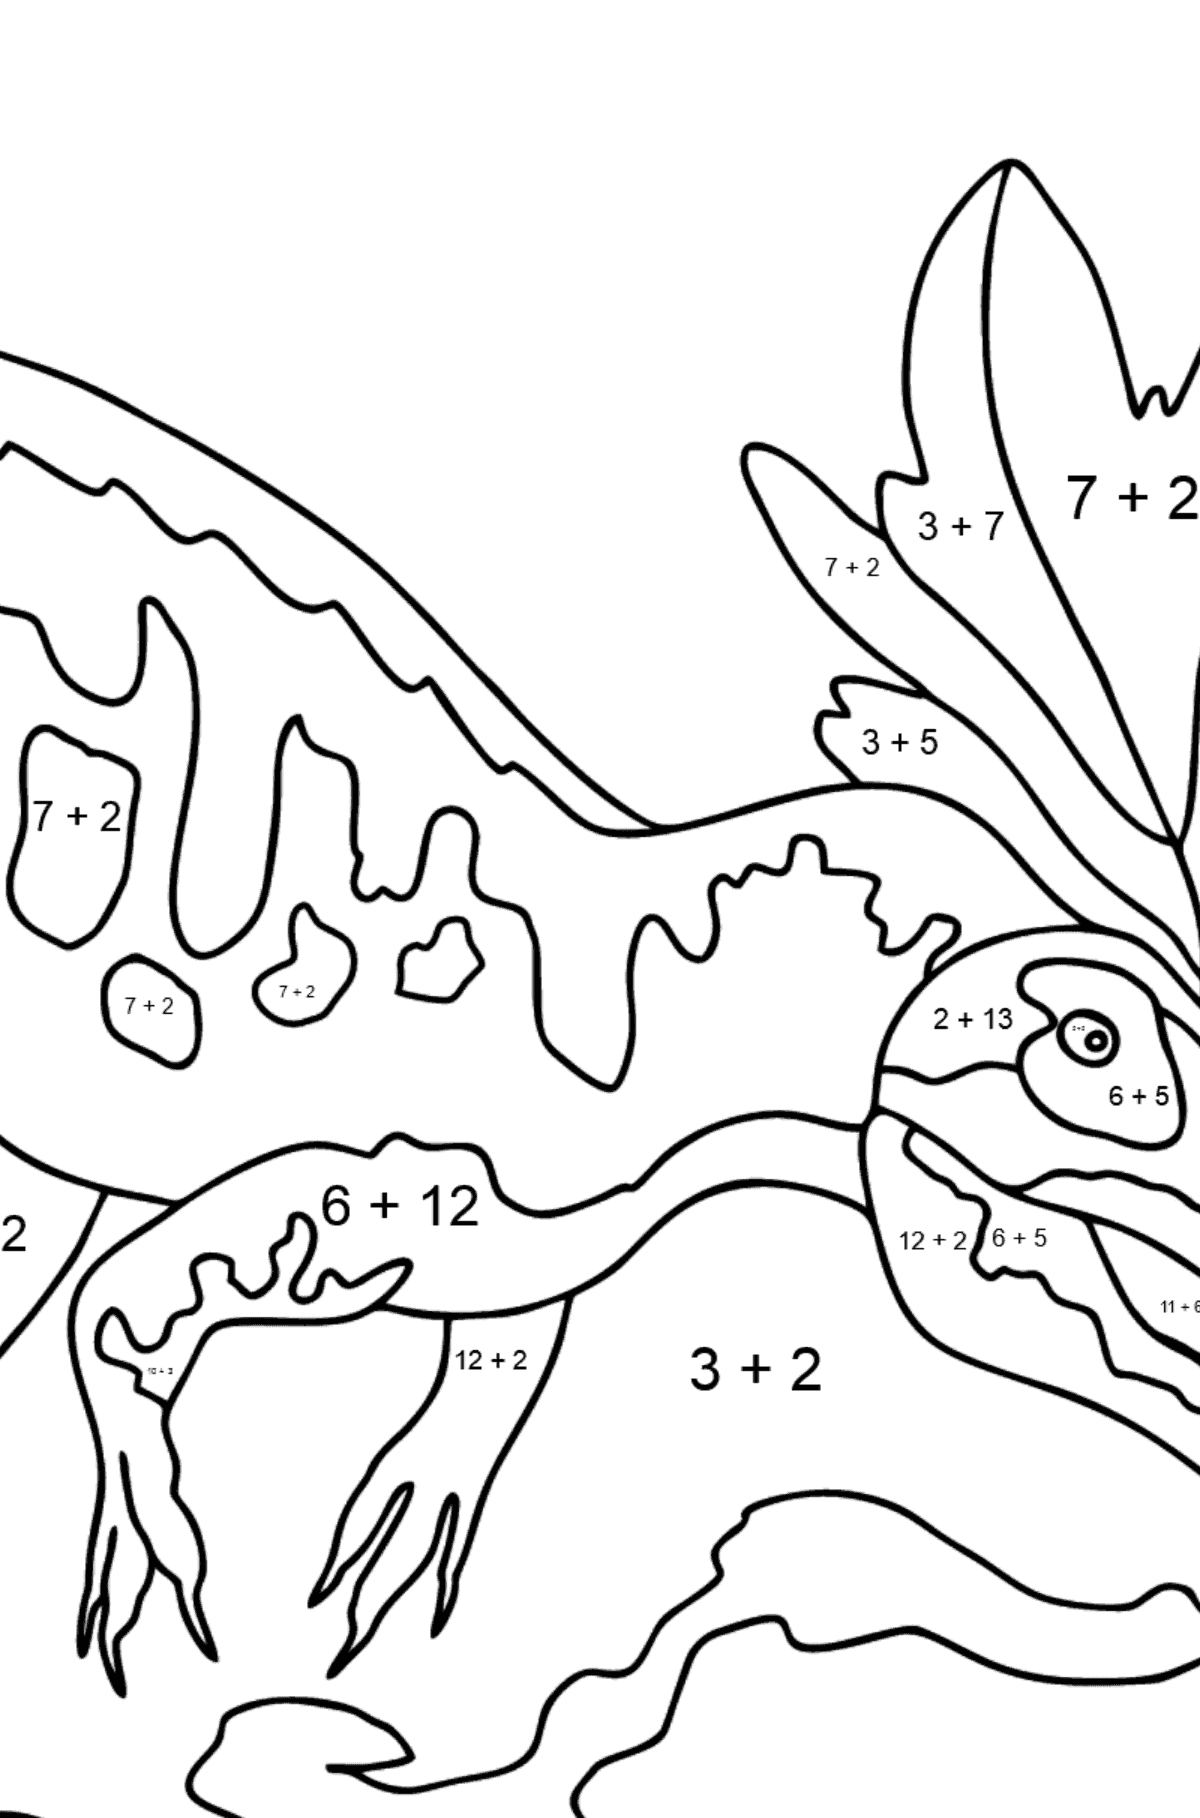 Coloring Page - Allosaurus - A Well-Researched Dinosaur - Math Coloring - Addition for Kids